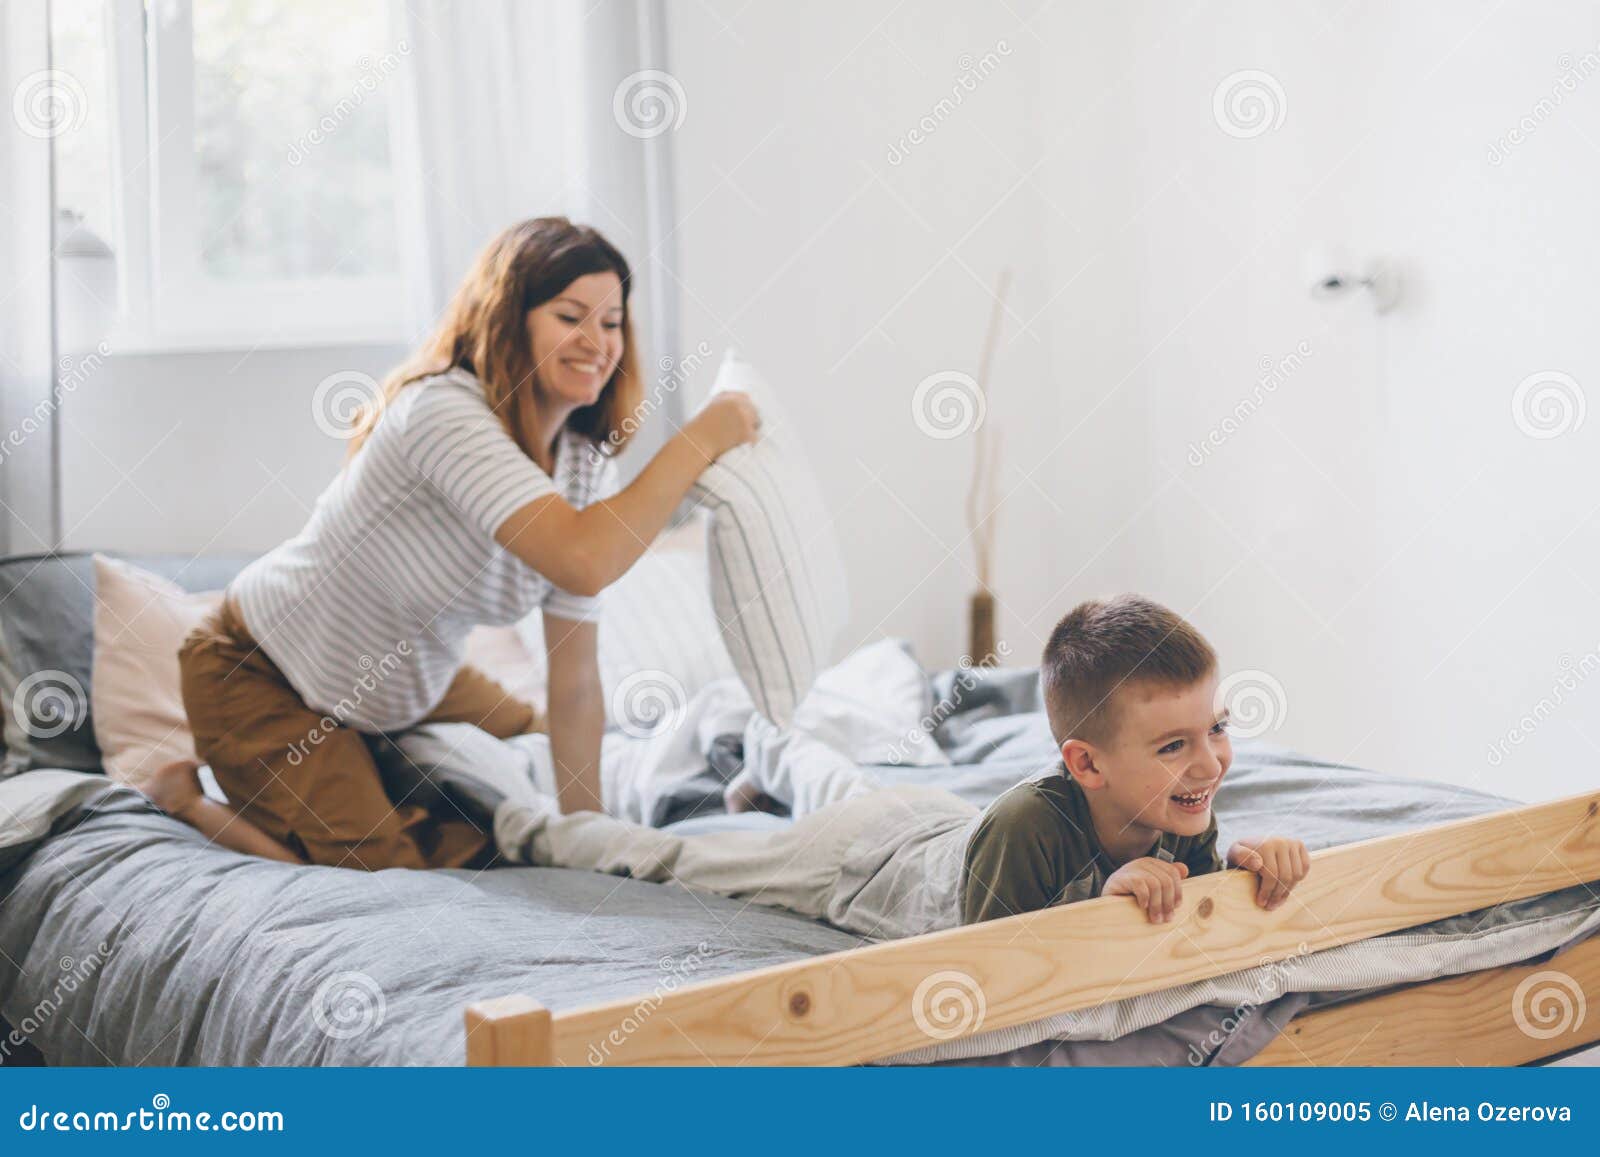 Mom And Son Share Room